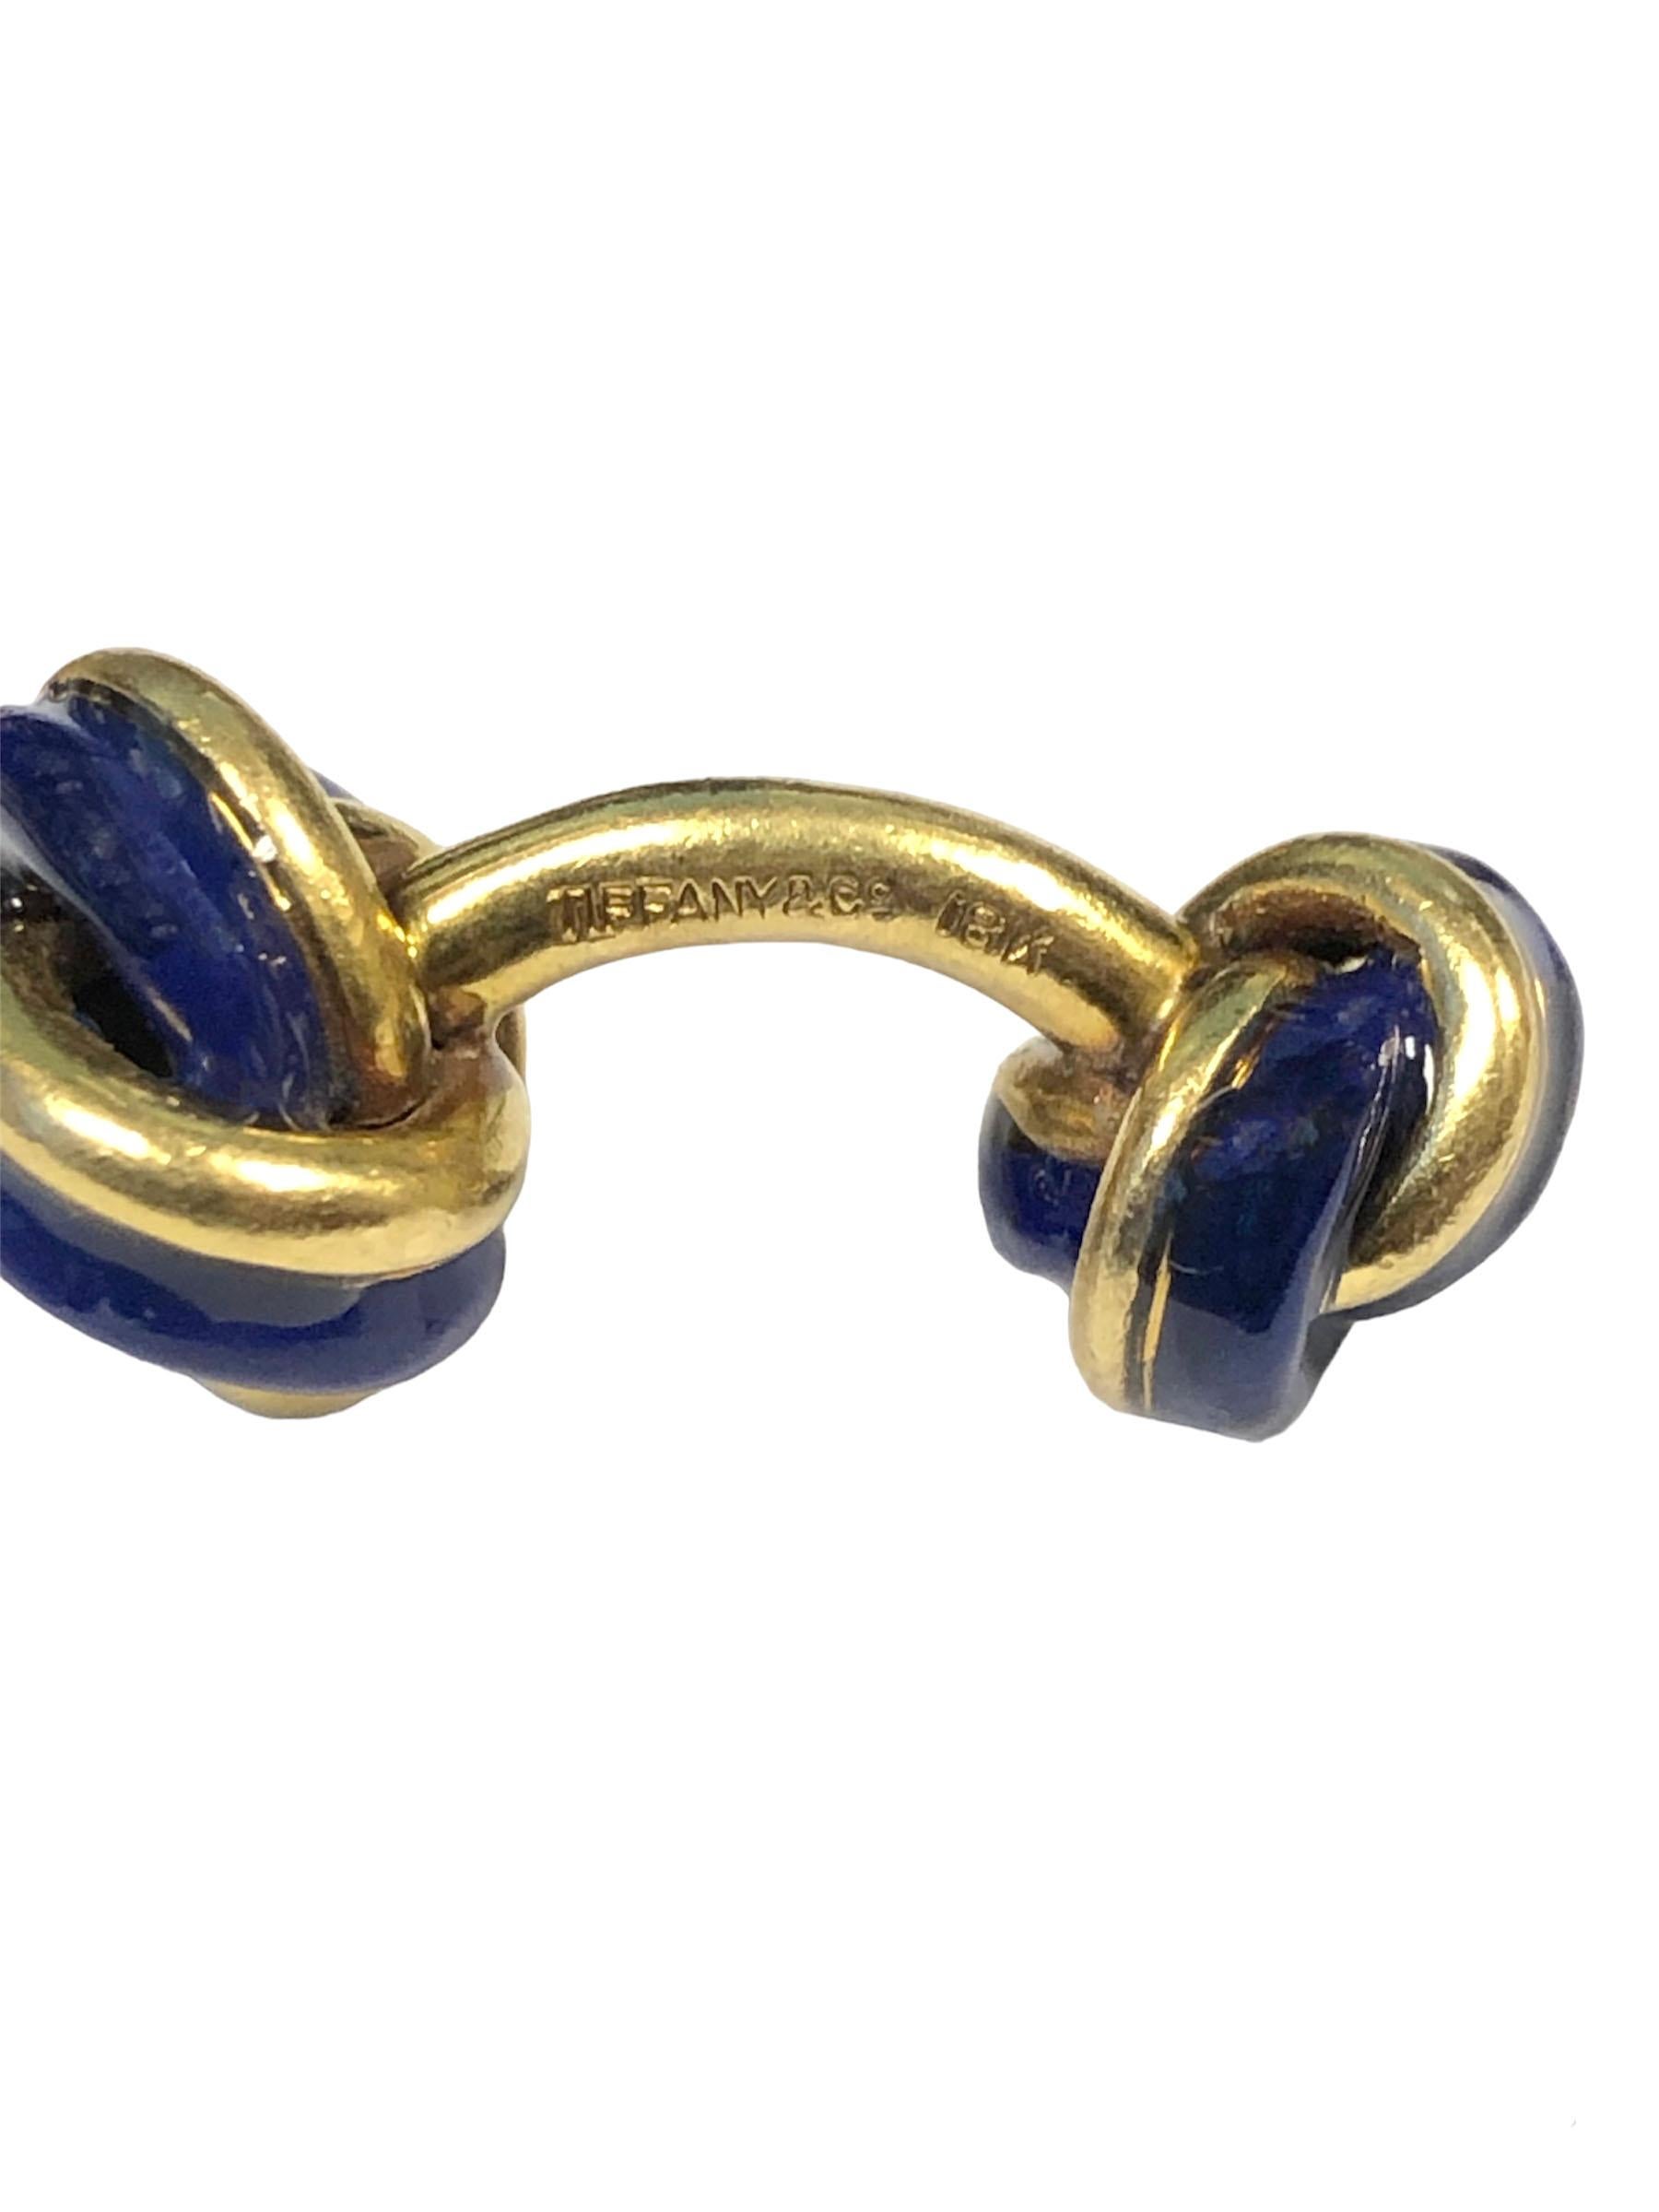 Circa 1980s Tiffany & Company 18k Yellow Gold and Cobalt Blue Enamel Knot form Cufflinks, measuring 1 inch in length with the bigger / top knot measuring 1/2 inch in diameter, nice sold heavy construction, weighing 23 Grams. 